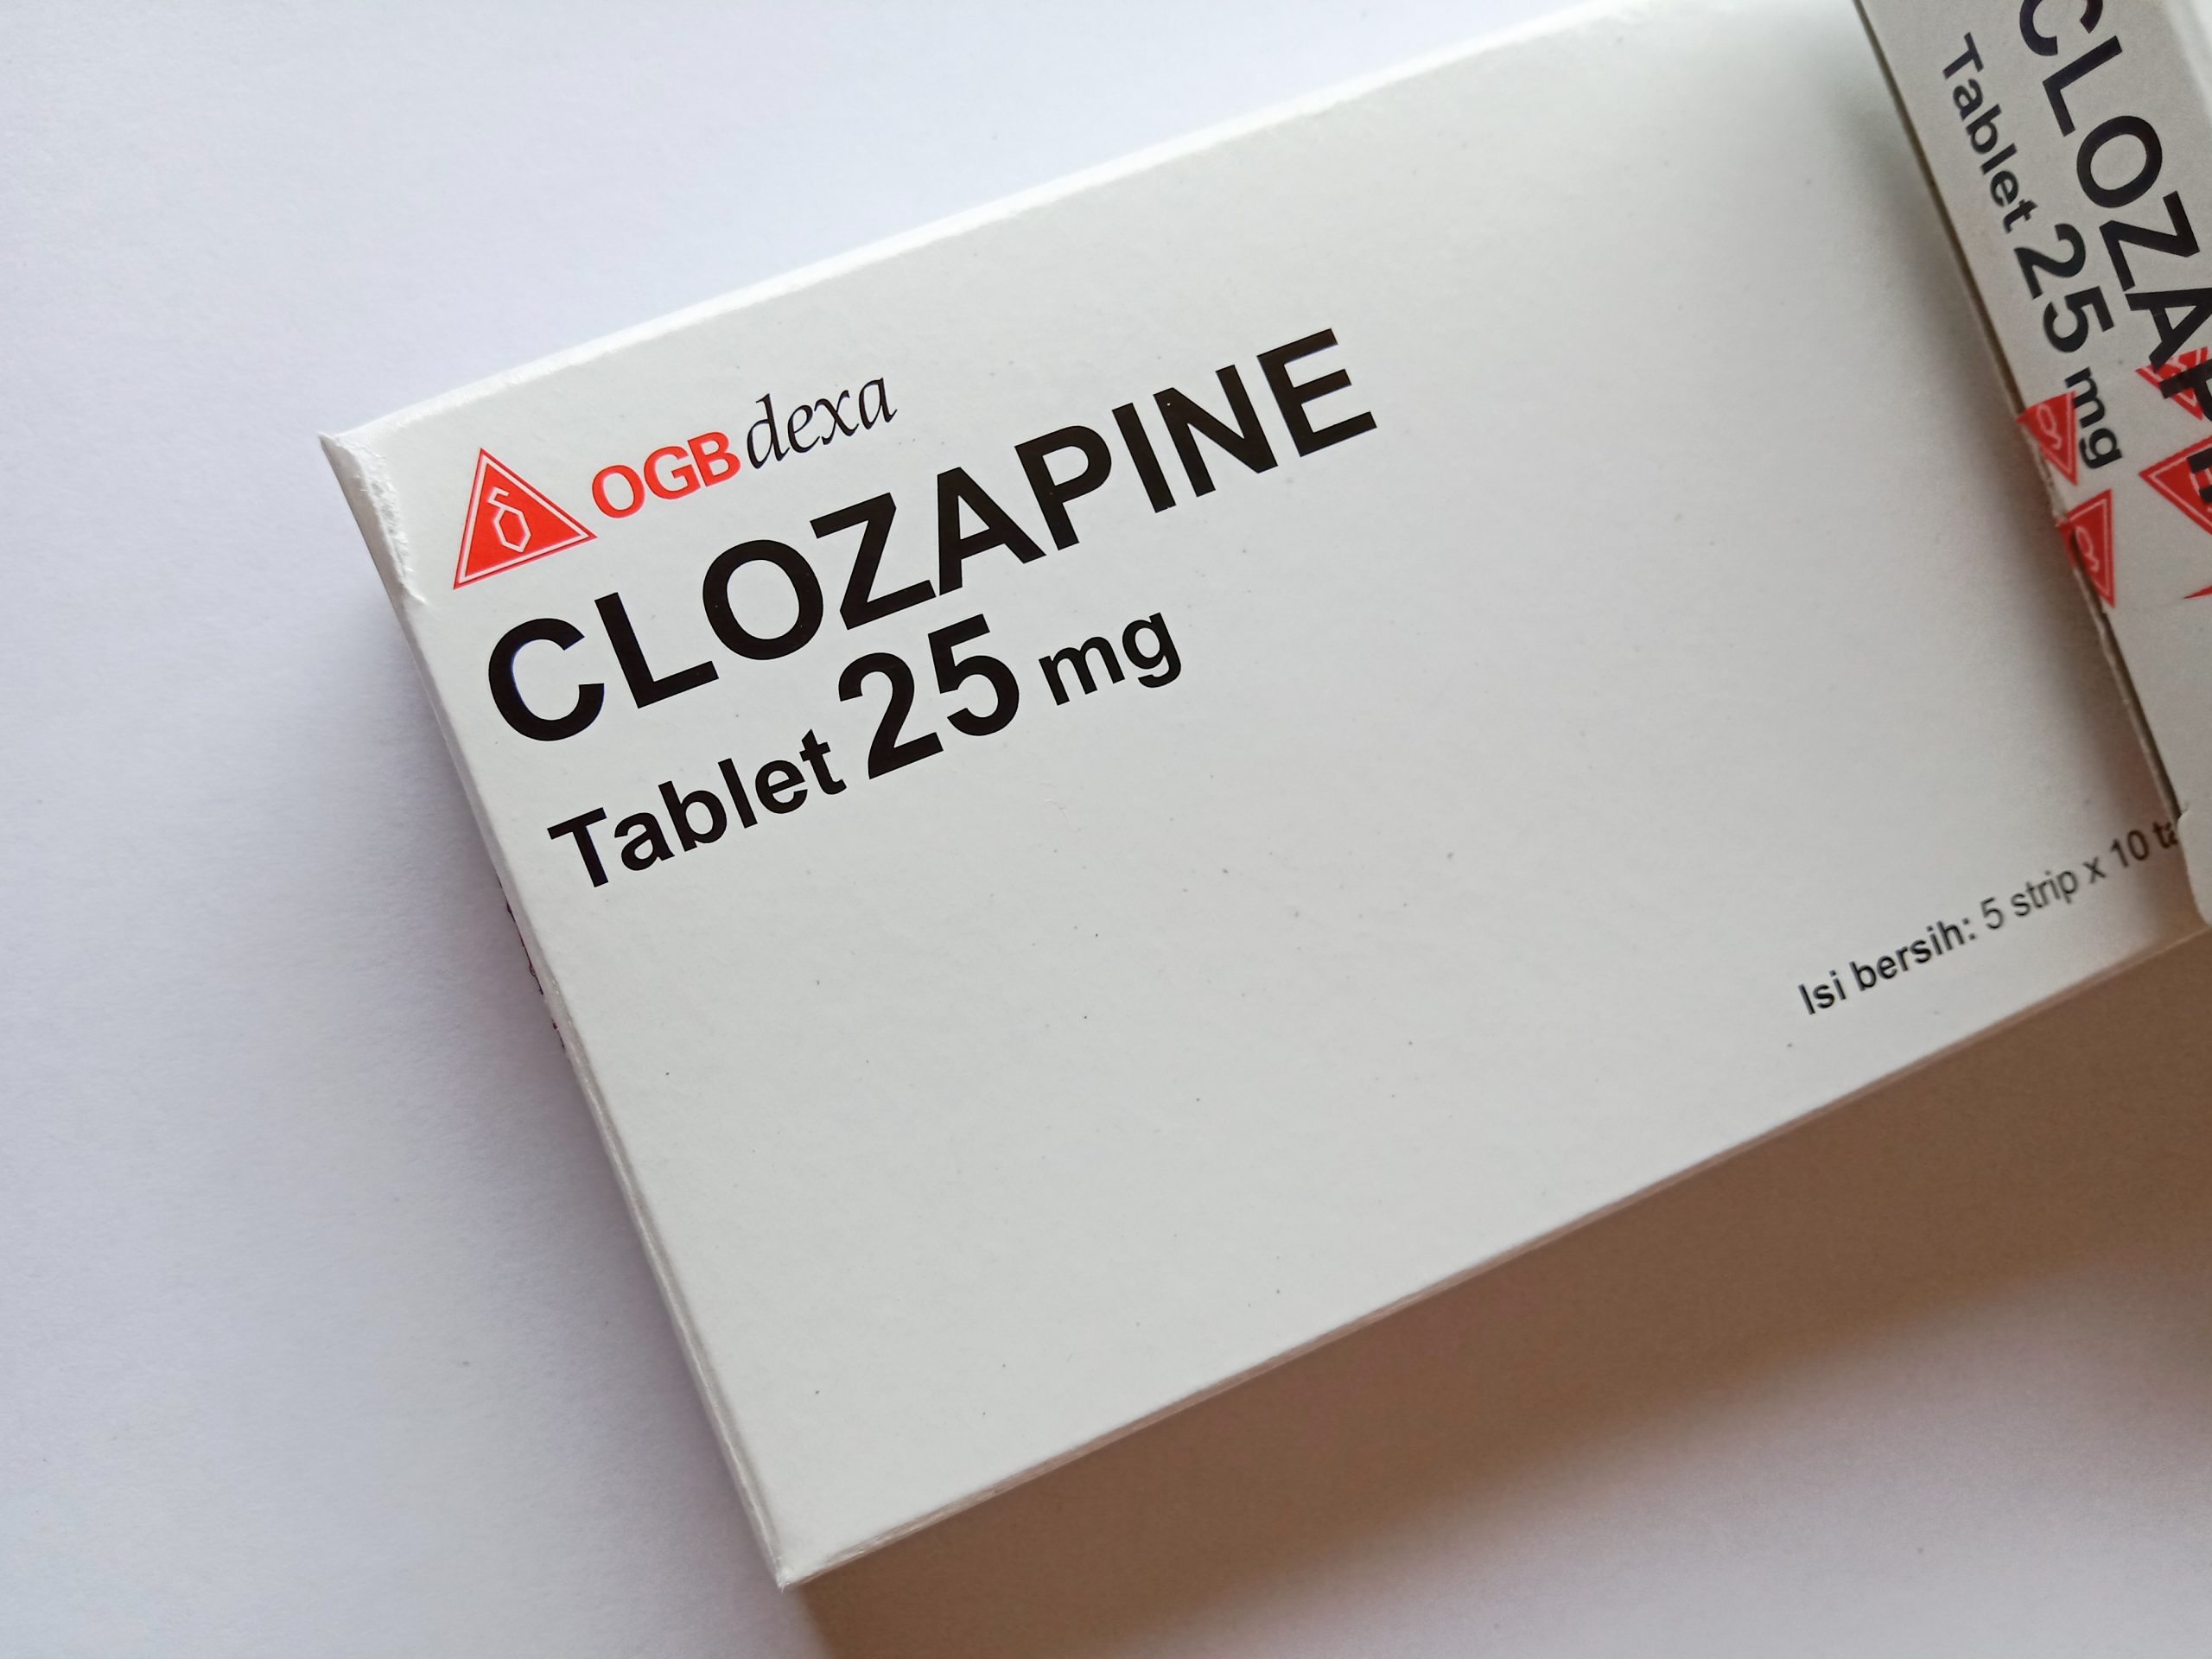 Close-up image of a package containing Clozapine tablets, highlighting advocacy initiatives and resources dedicated to enhancing accessibility to this crucial treatment for individuals with treatment-resistant schizophrenia